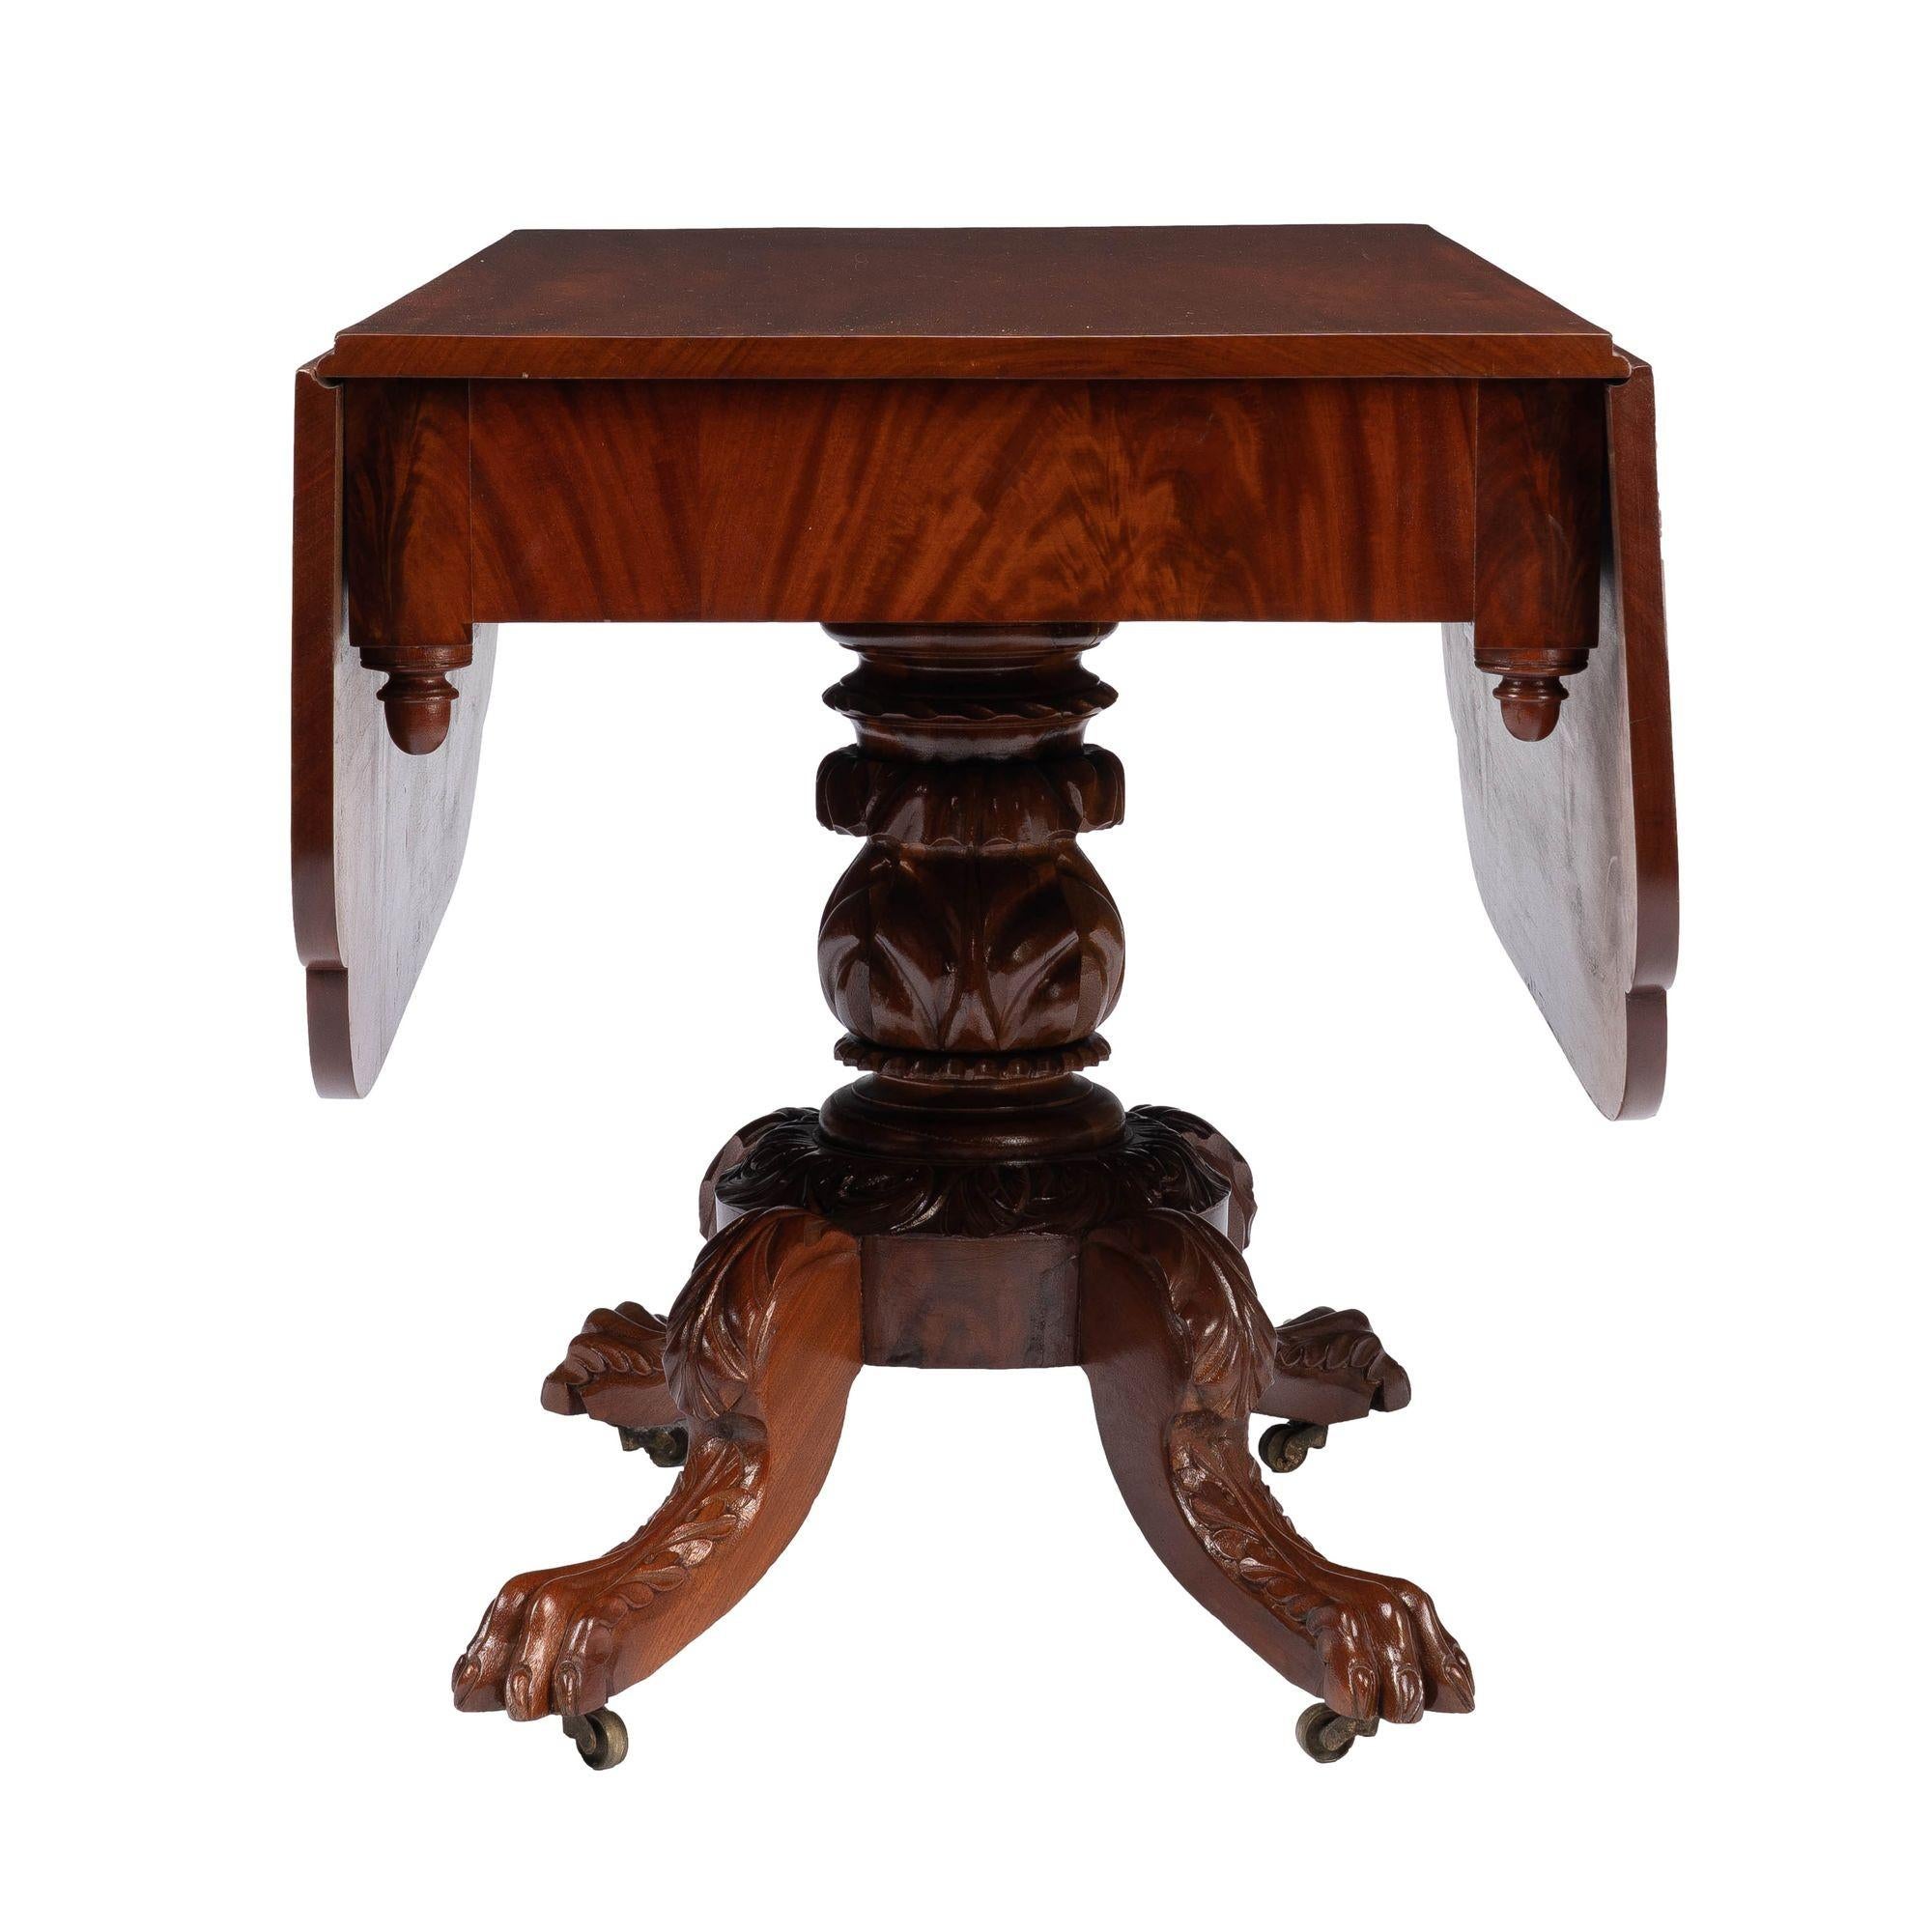 19th Century New York Neoclassic Drop Leaf Breakfast Table, c. 1825 For Sale